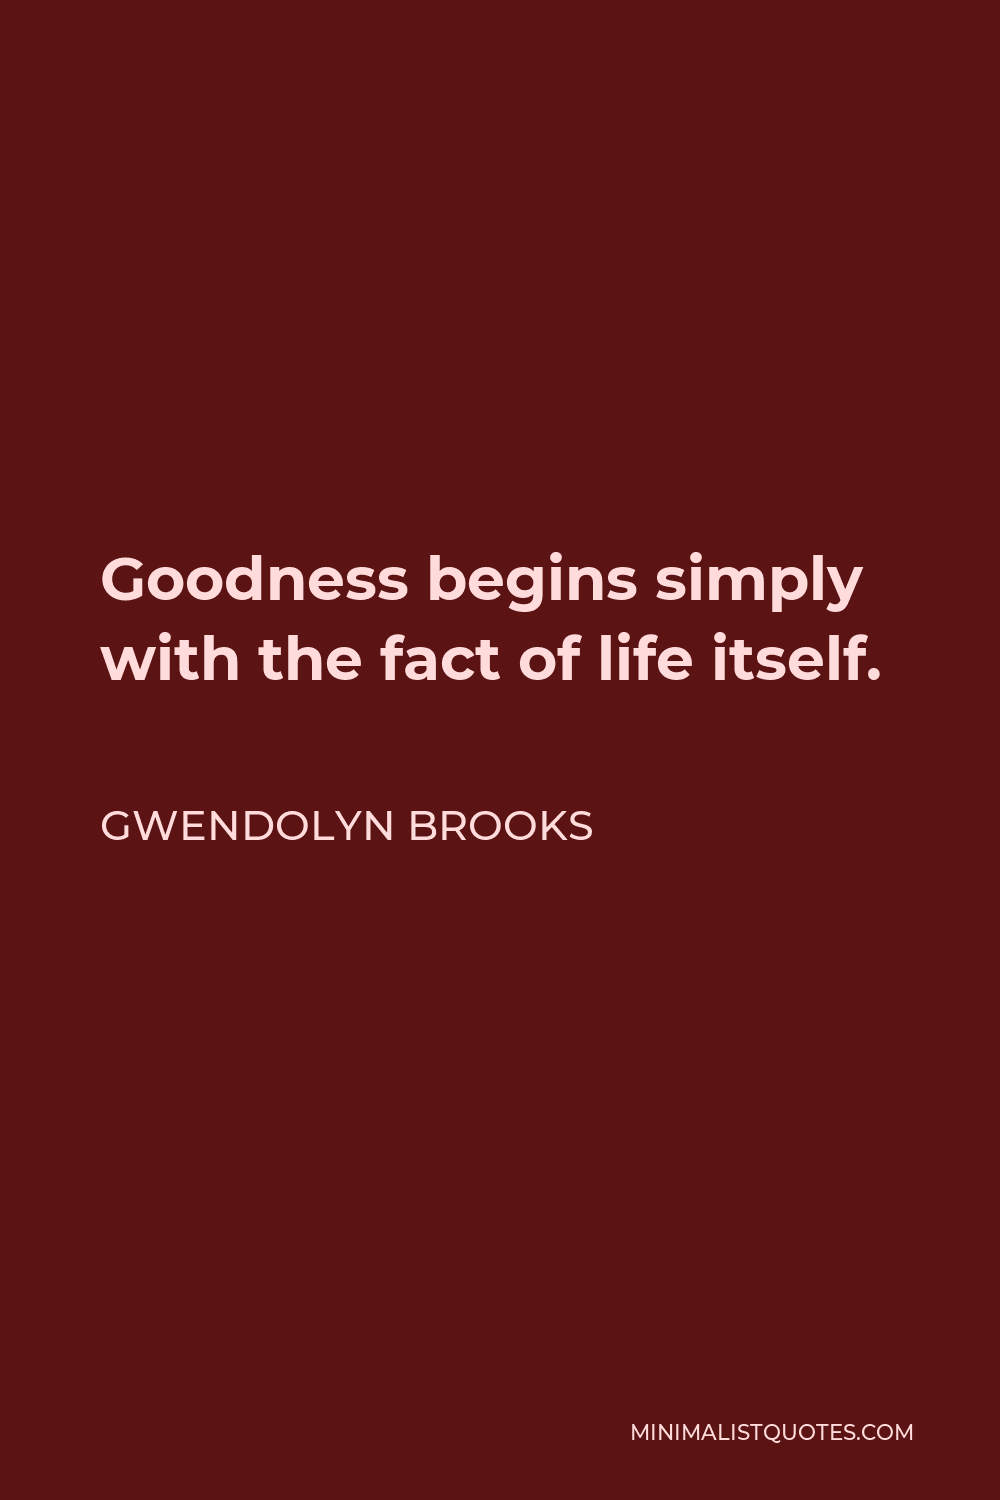 Gwendolyn Brooks Quote - Goodness begins simply with the fact of life itself.